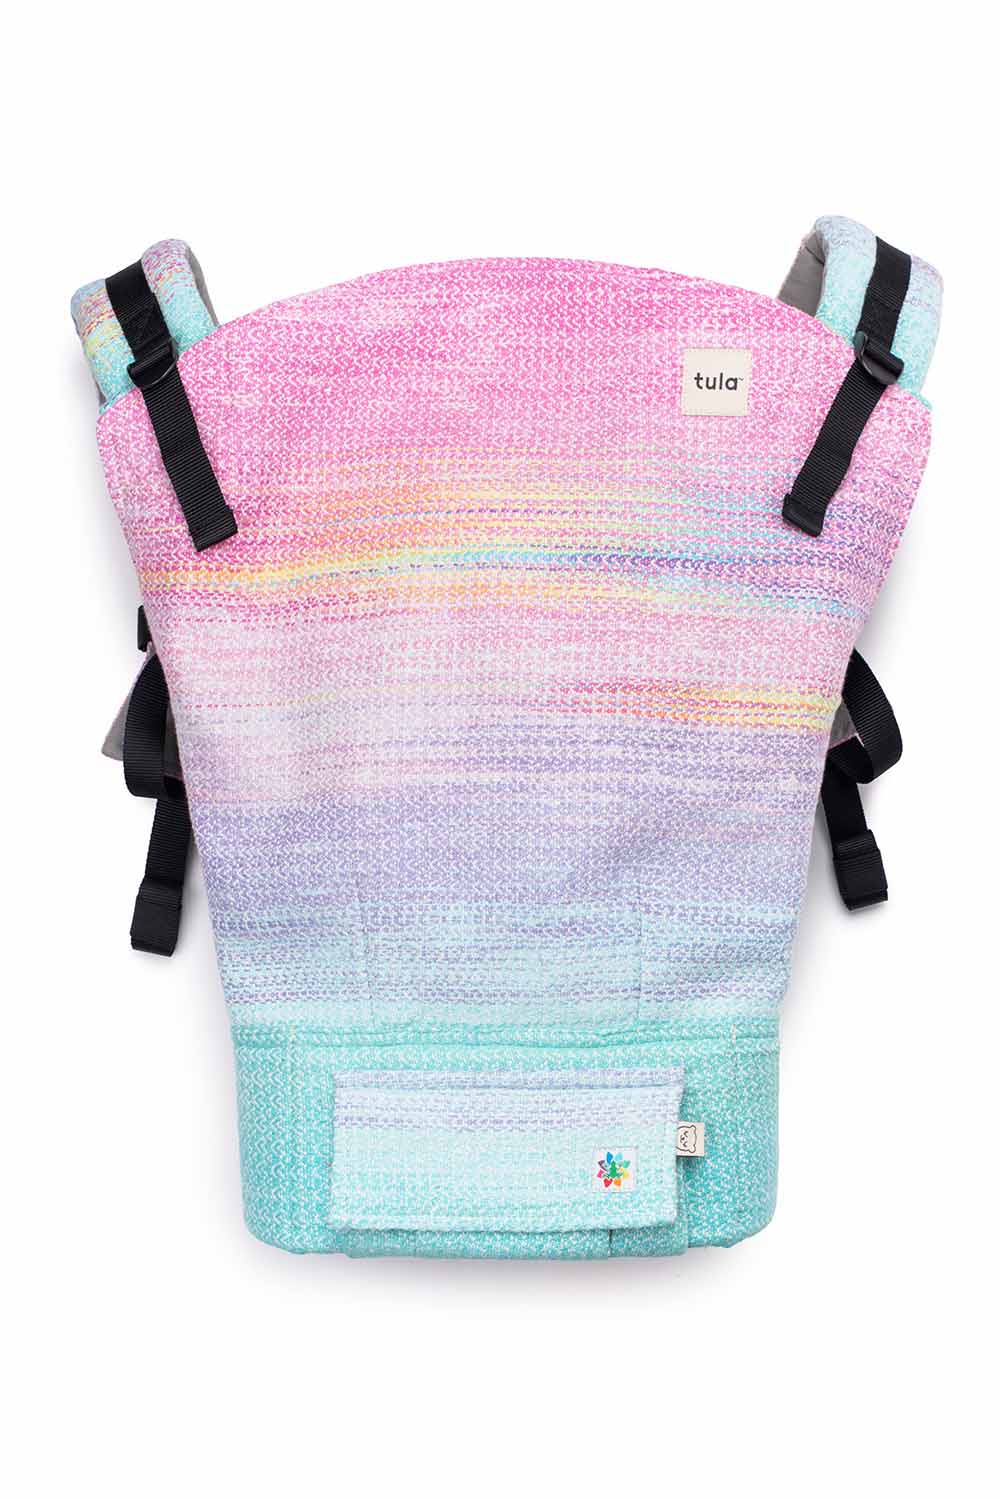 Sugarland - Signature Handwoven Toddler Carrier